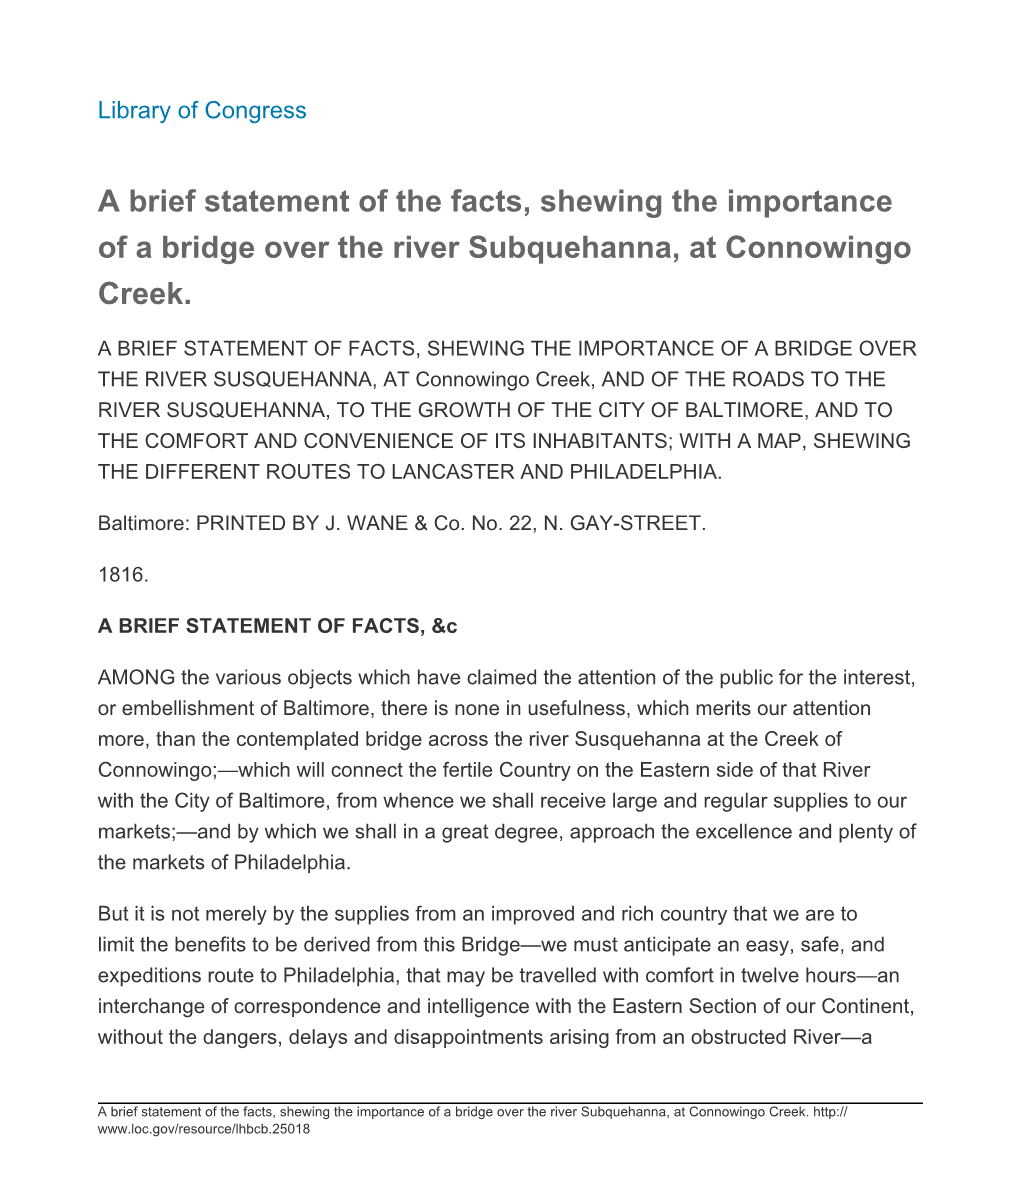 A Brief Statement of the Facts, Shewing the Importance of a Bridge Over the River Subquehanna, at Connowingo Creek